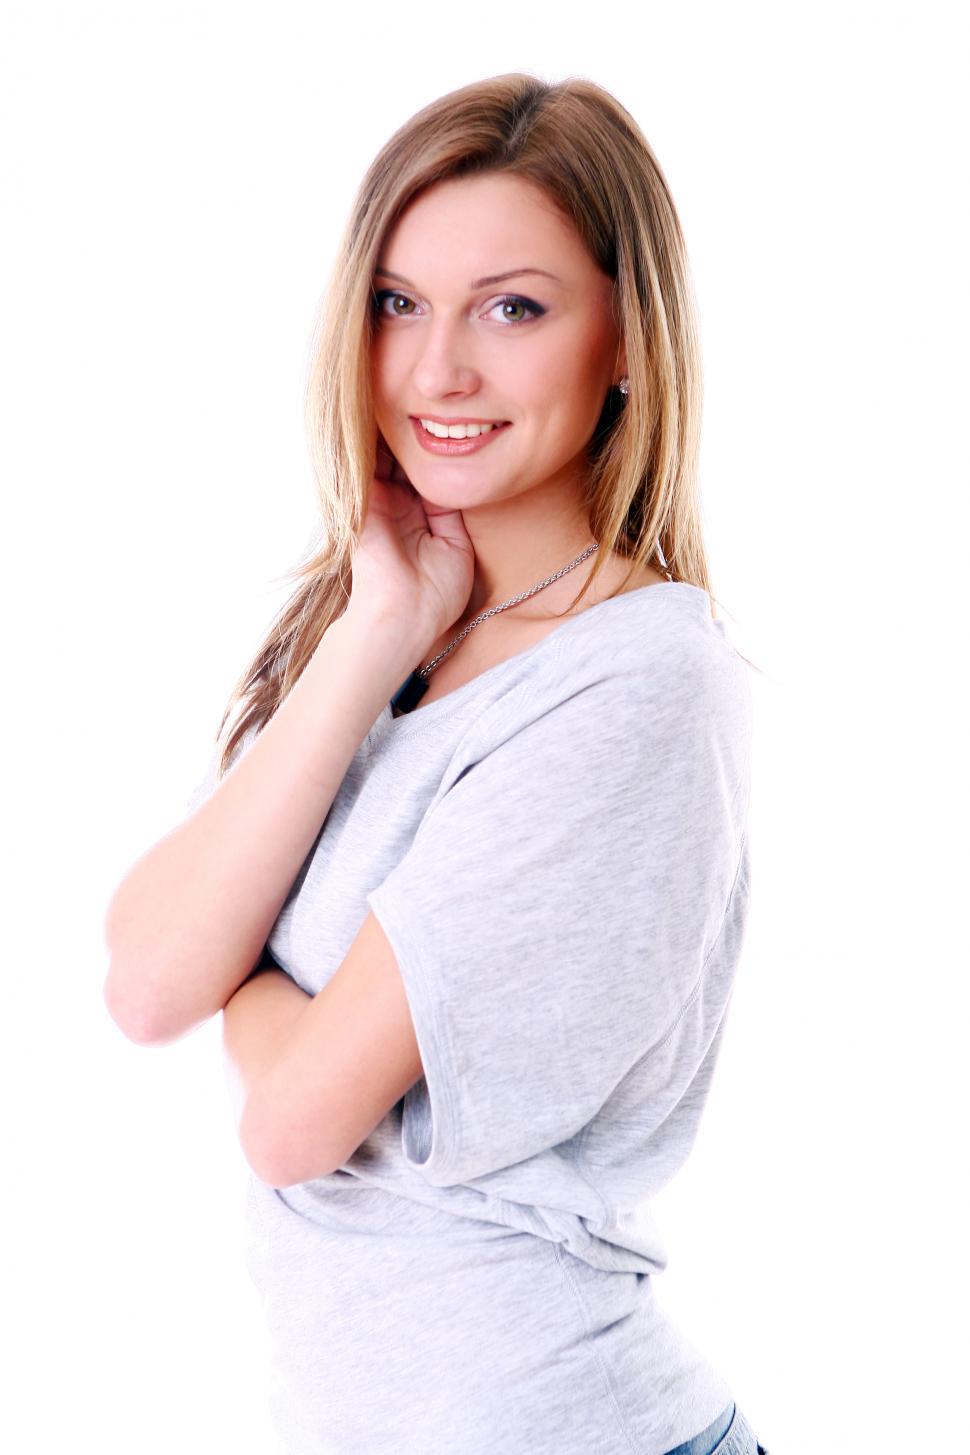 Free Image of Portrait of young woman smiling against white backgr 